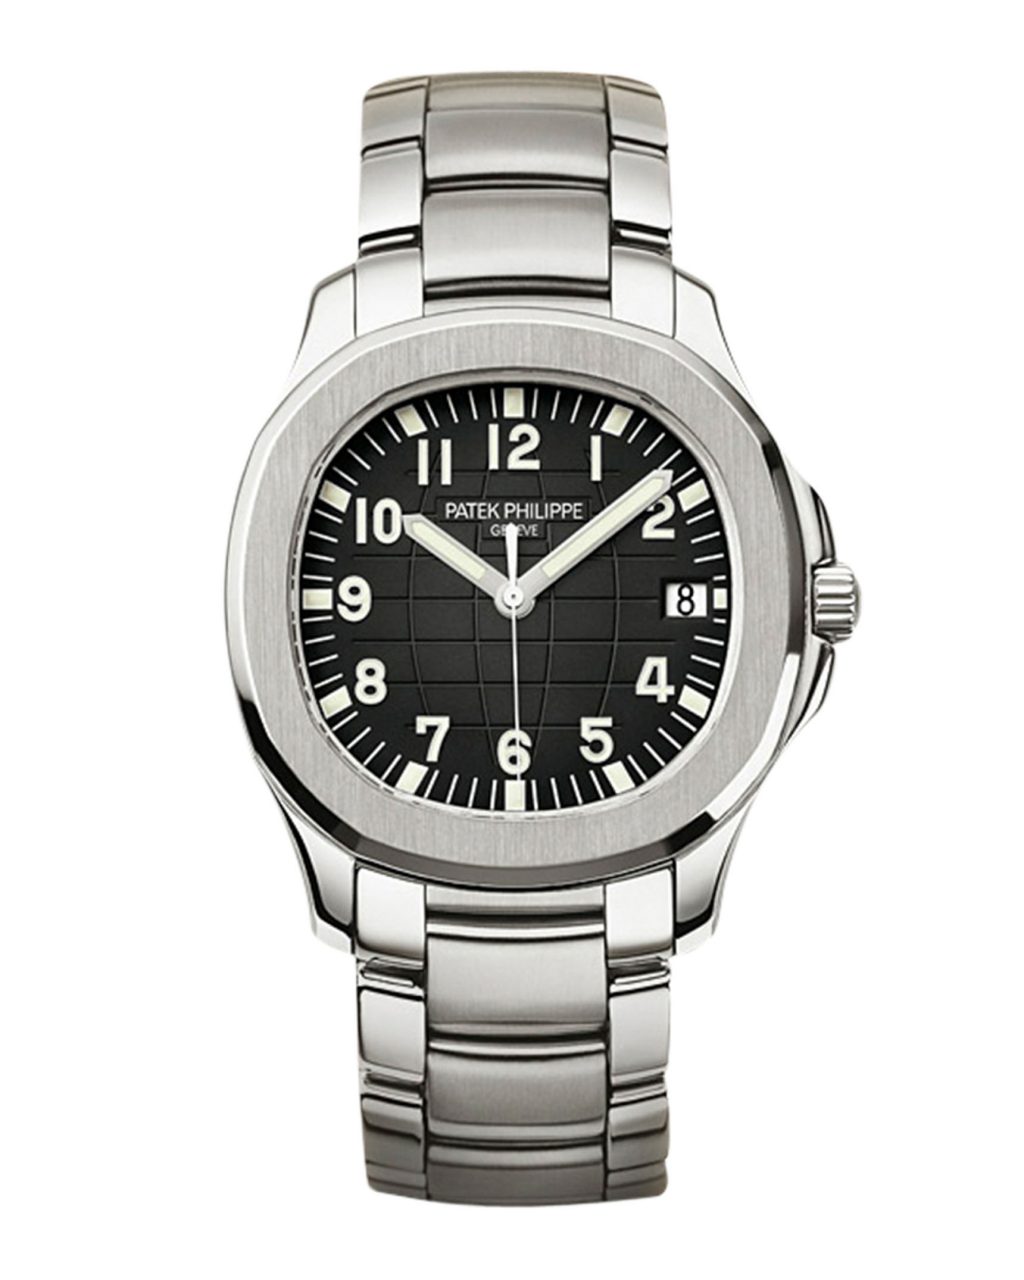 5167/1A-001 - Stainless Steel - Men Aquanaut